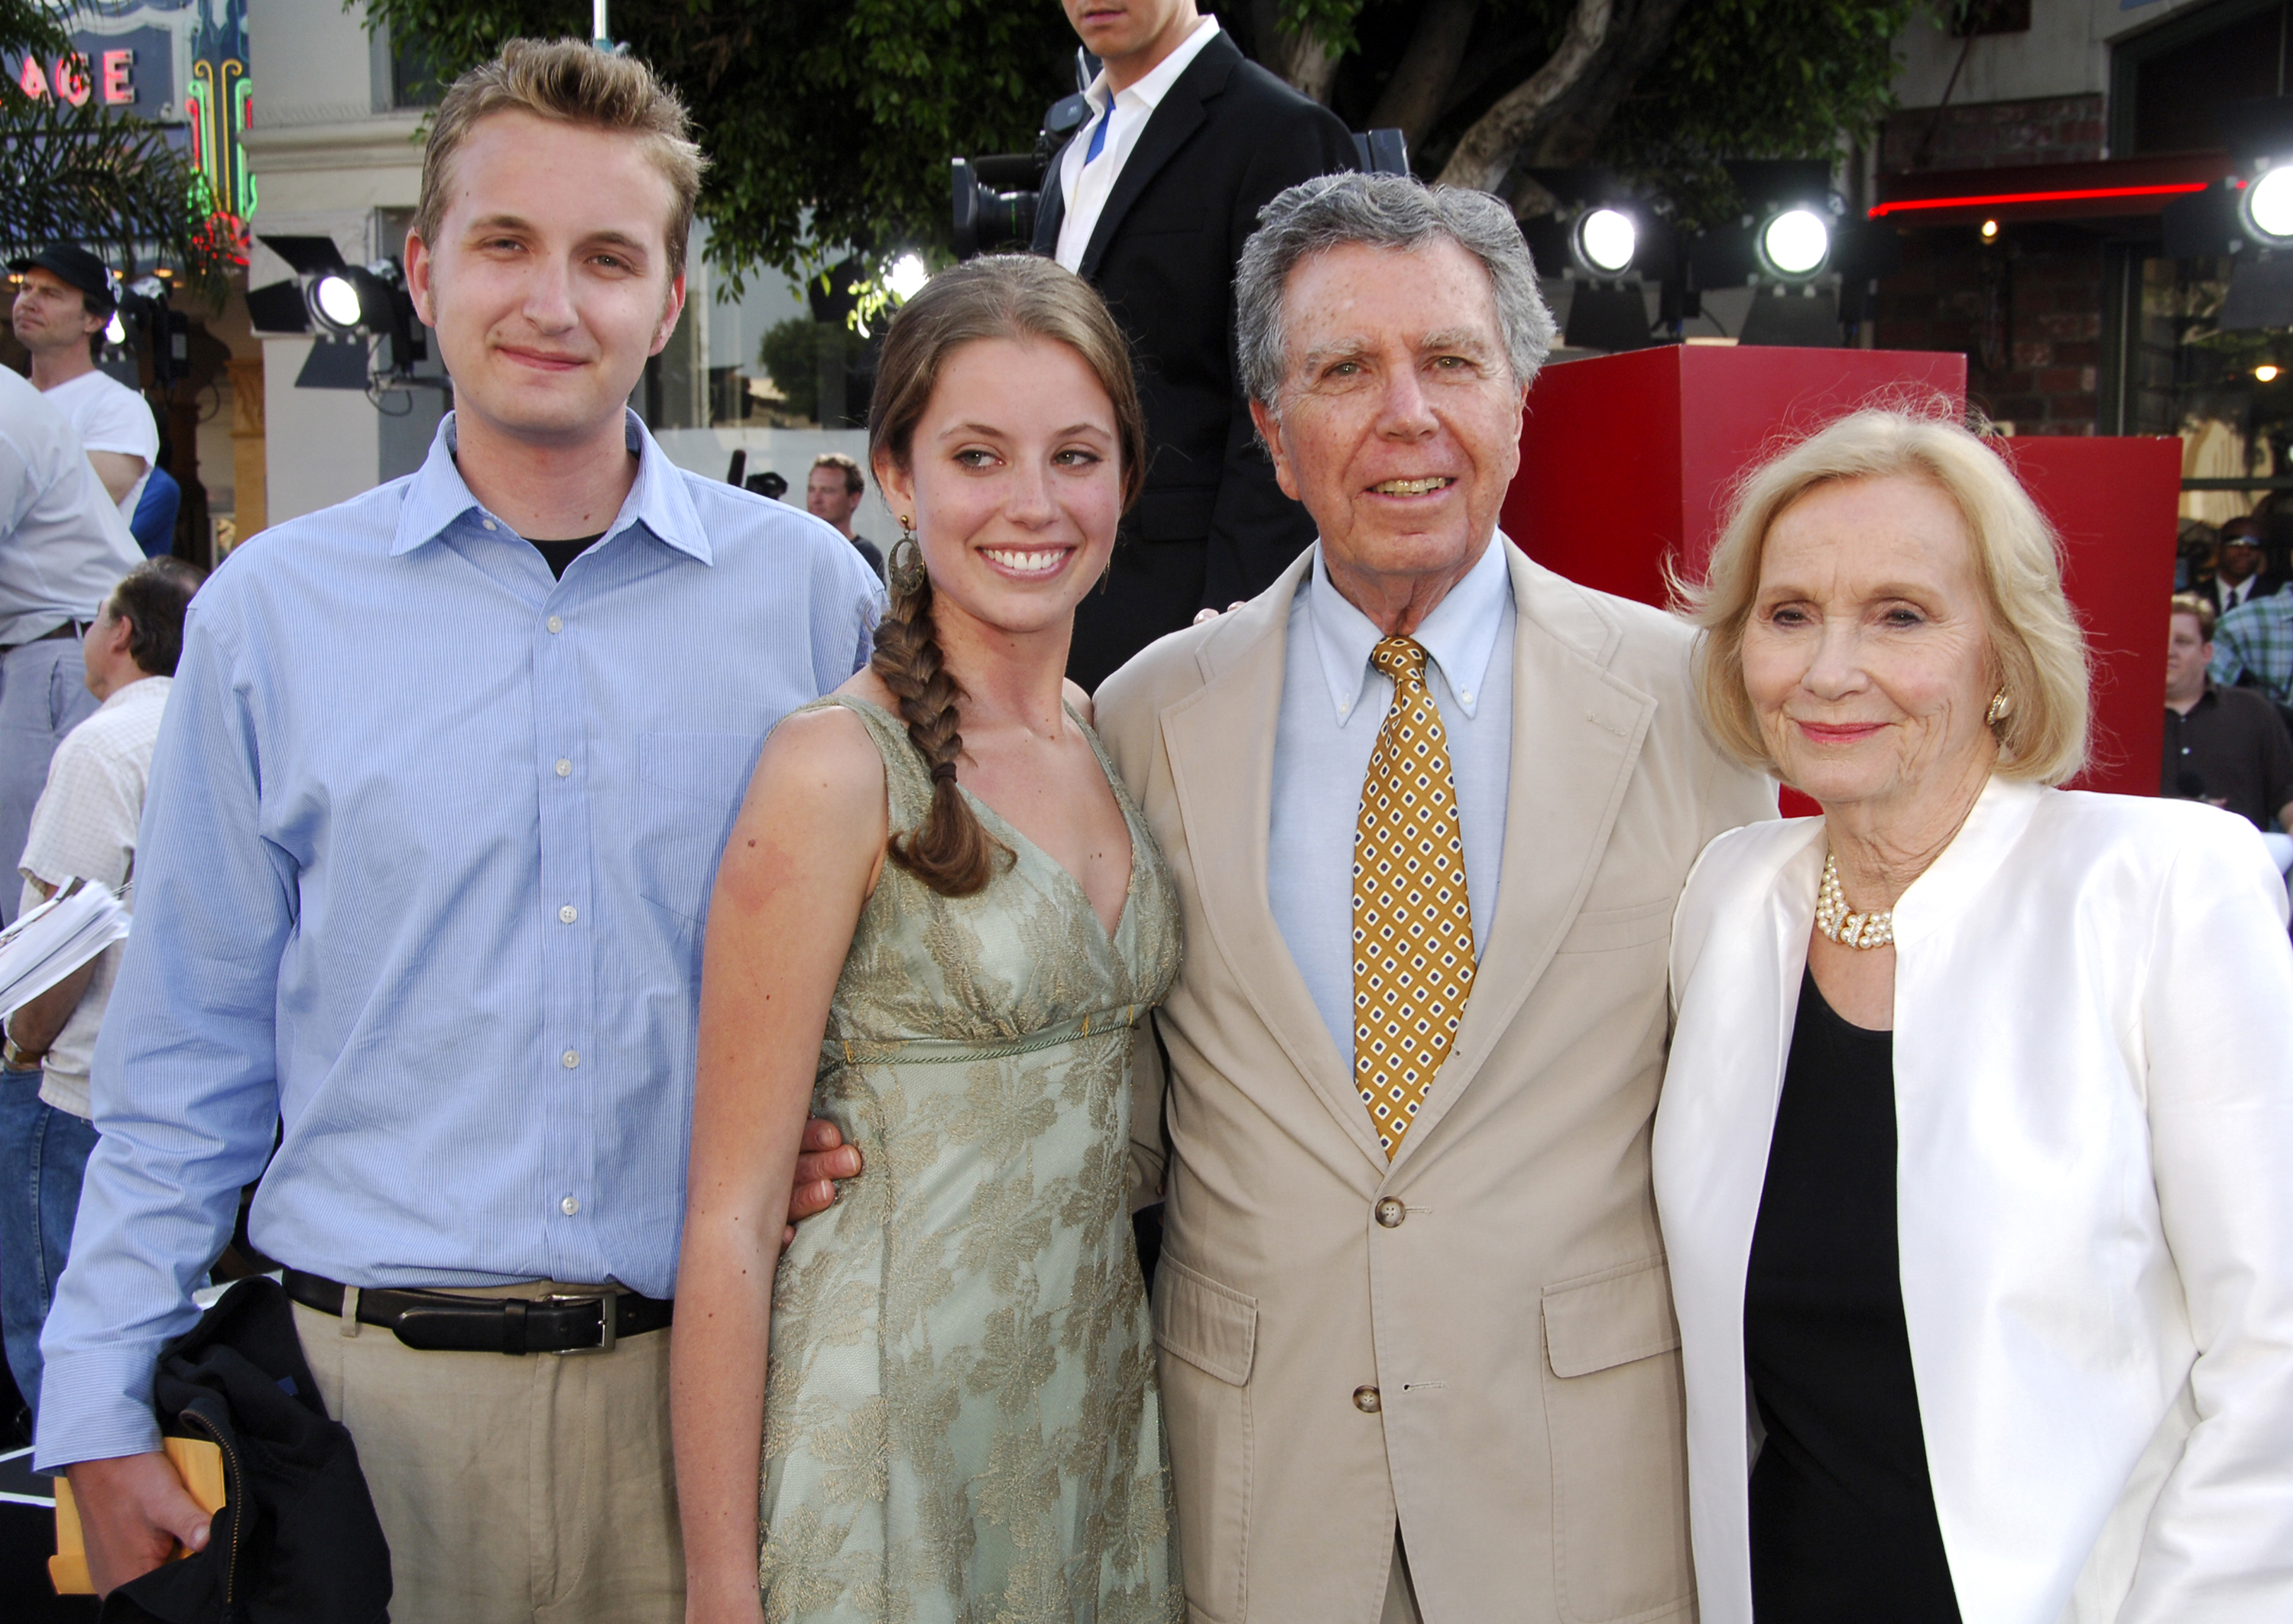 Jeffrey Hayden and Eva Marie Saint with their grandchildren at the world premiere of "Superman Returns" in 2006 | Source: Getty Images